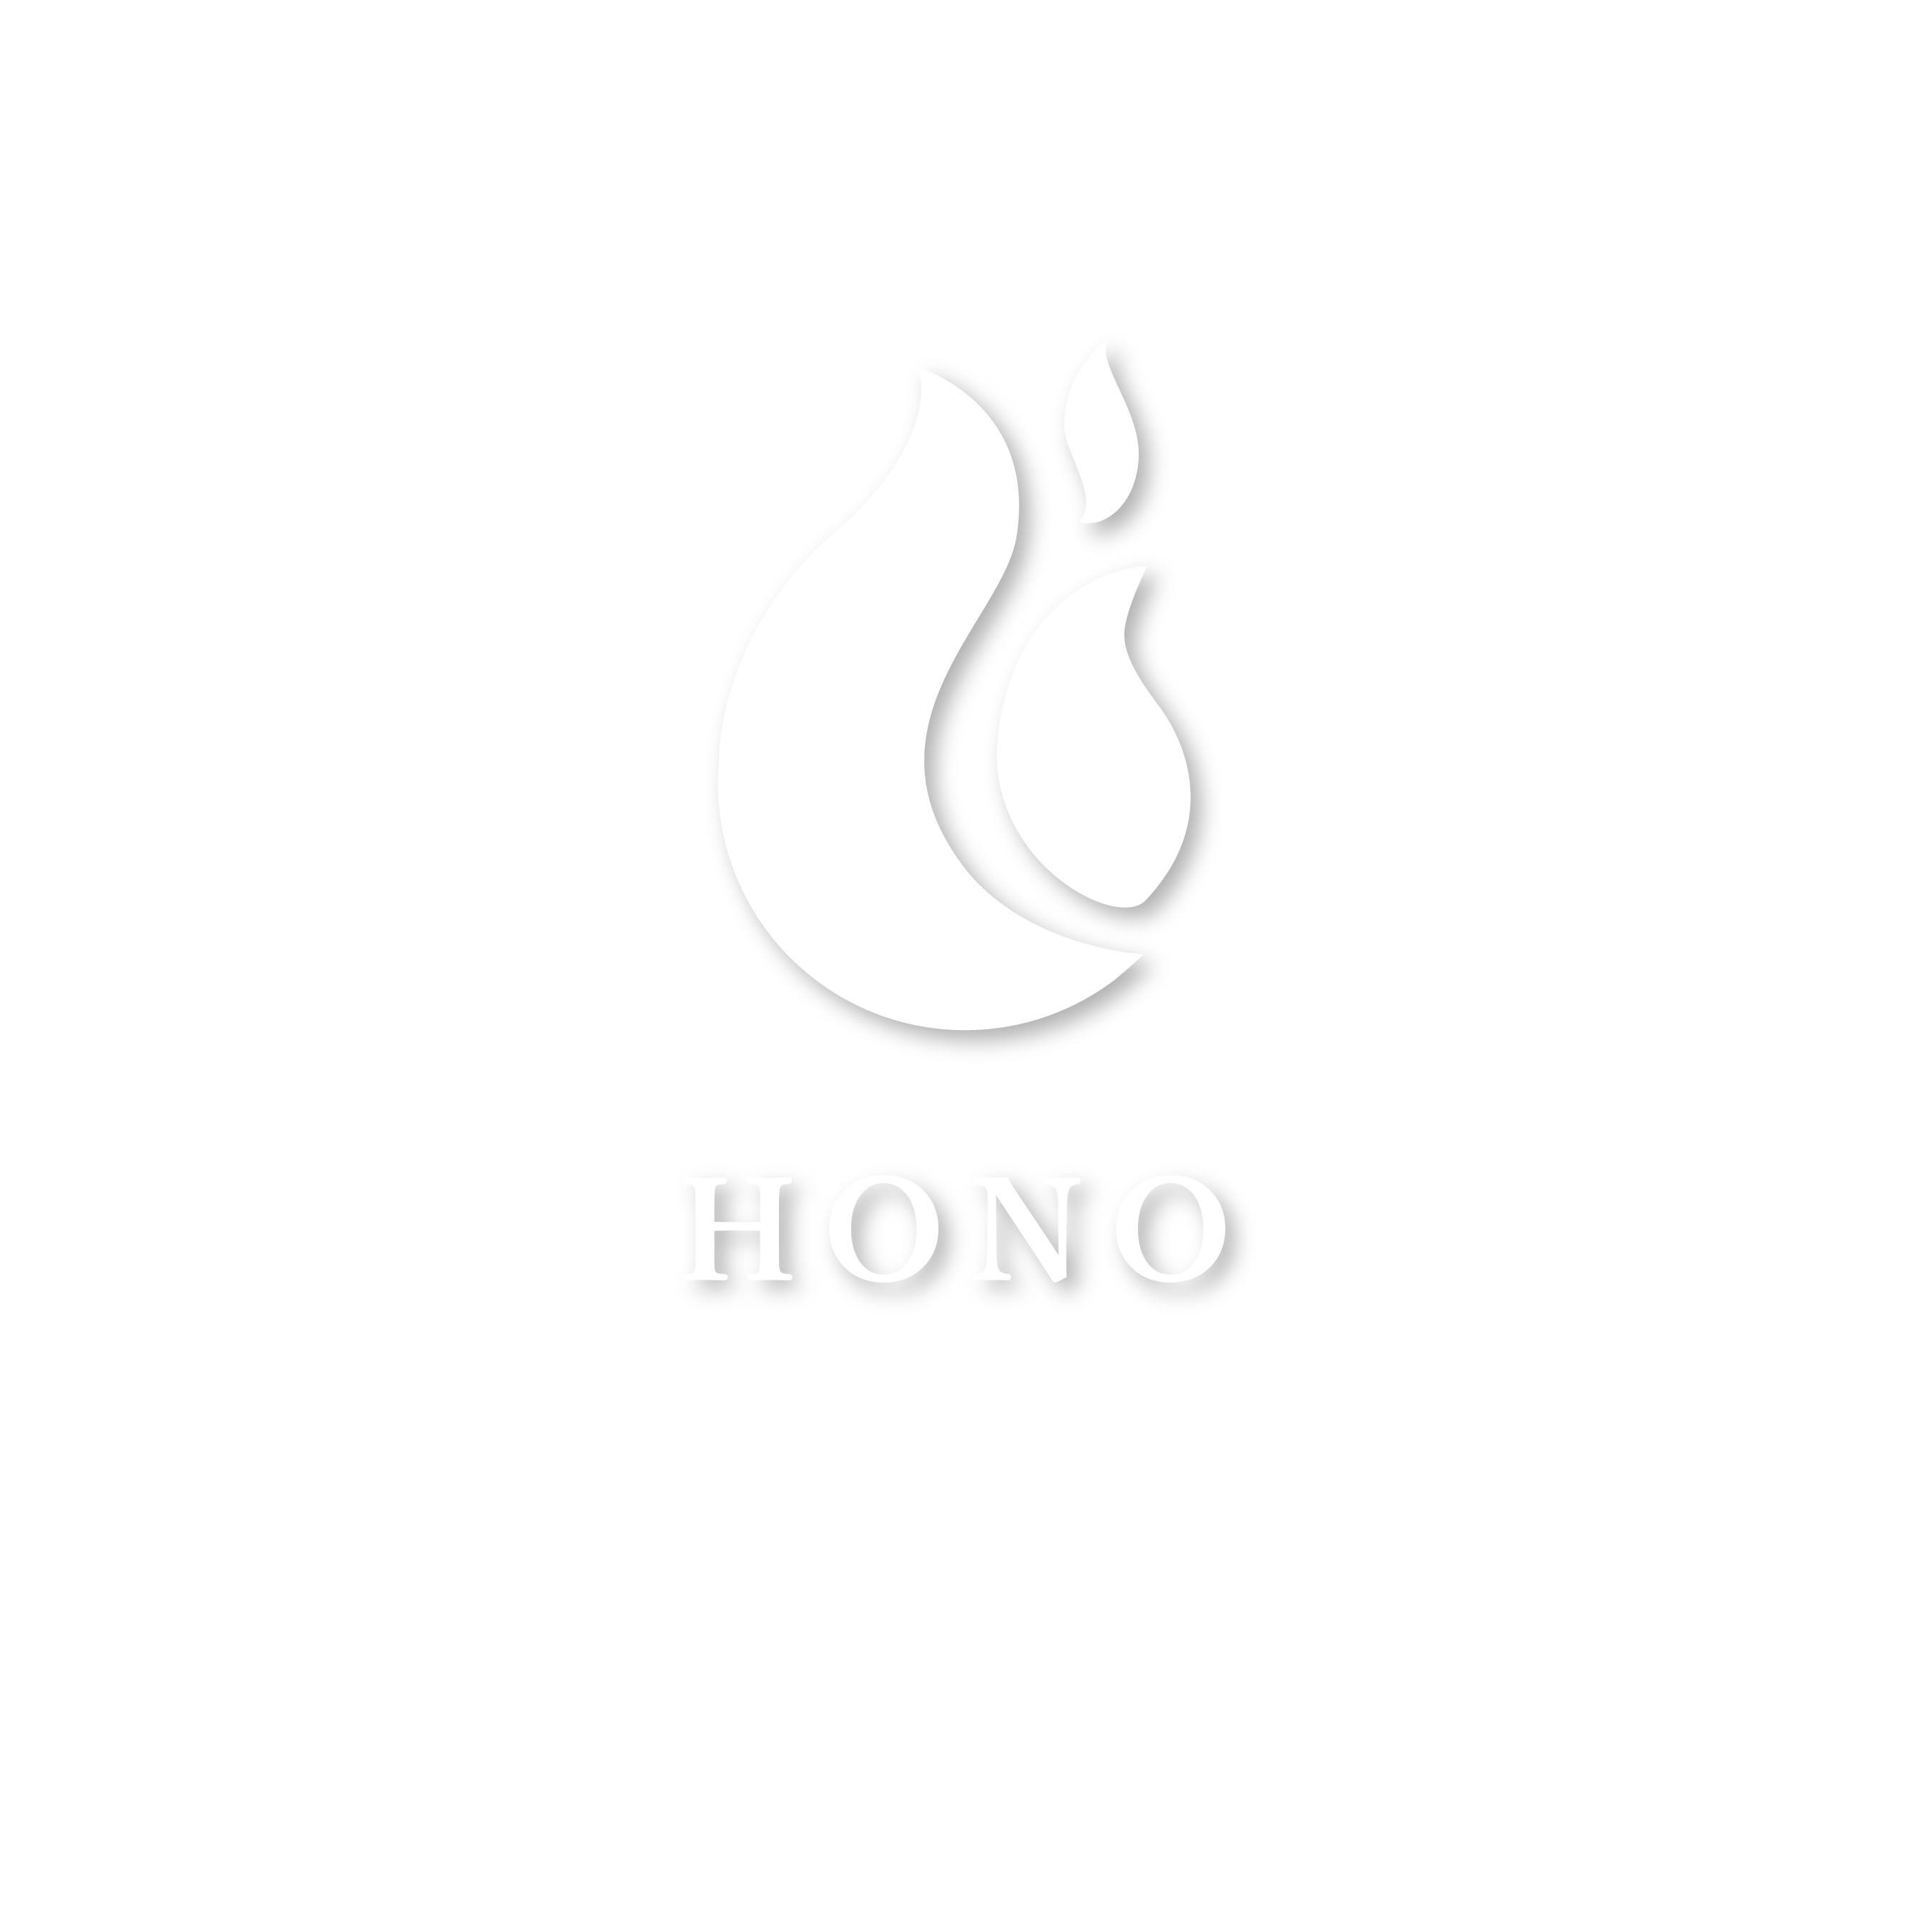 Click here for details on the dining hall building "HONO.